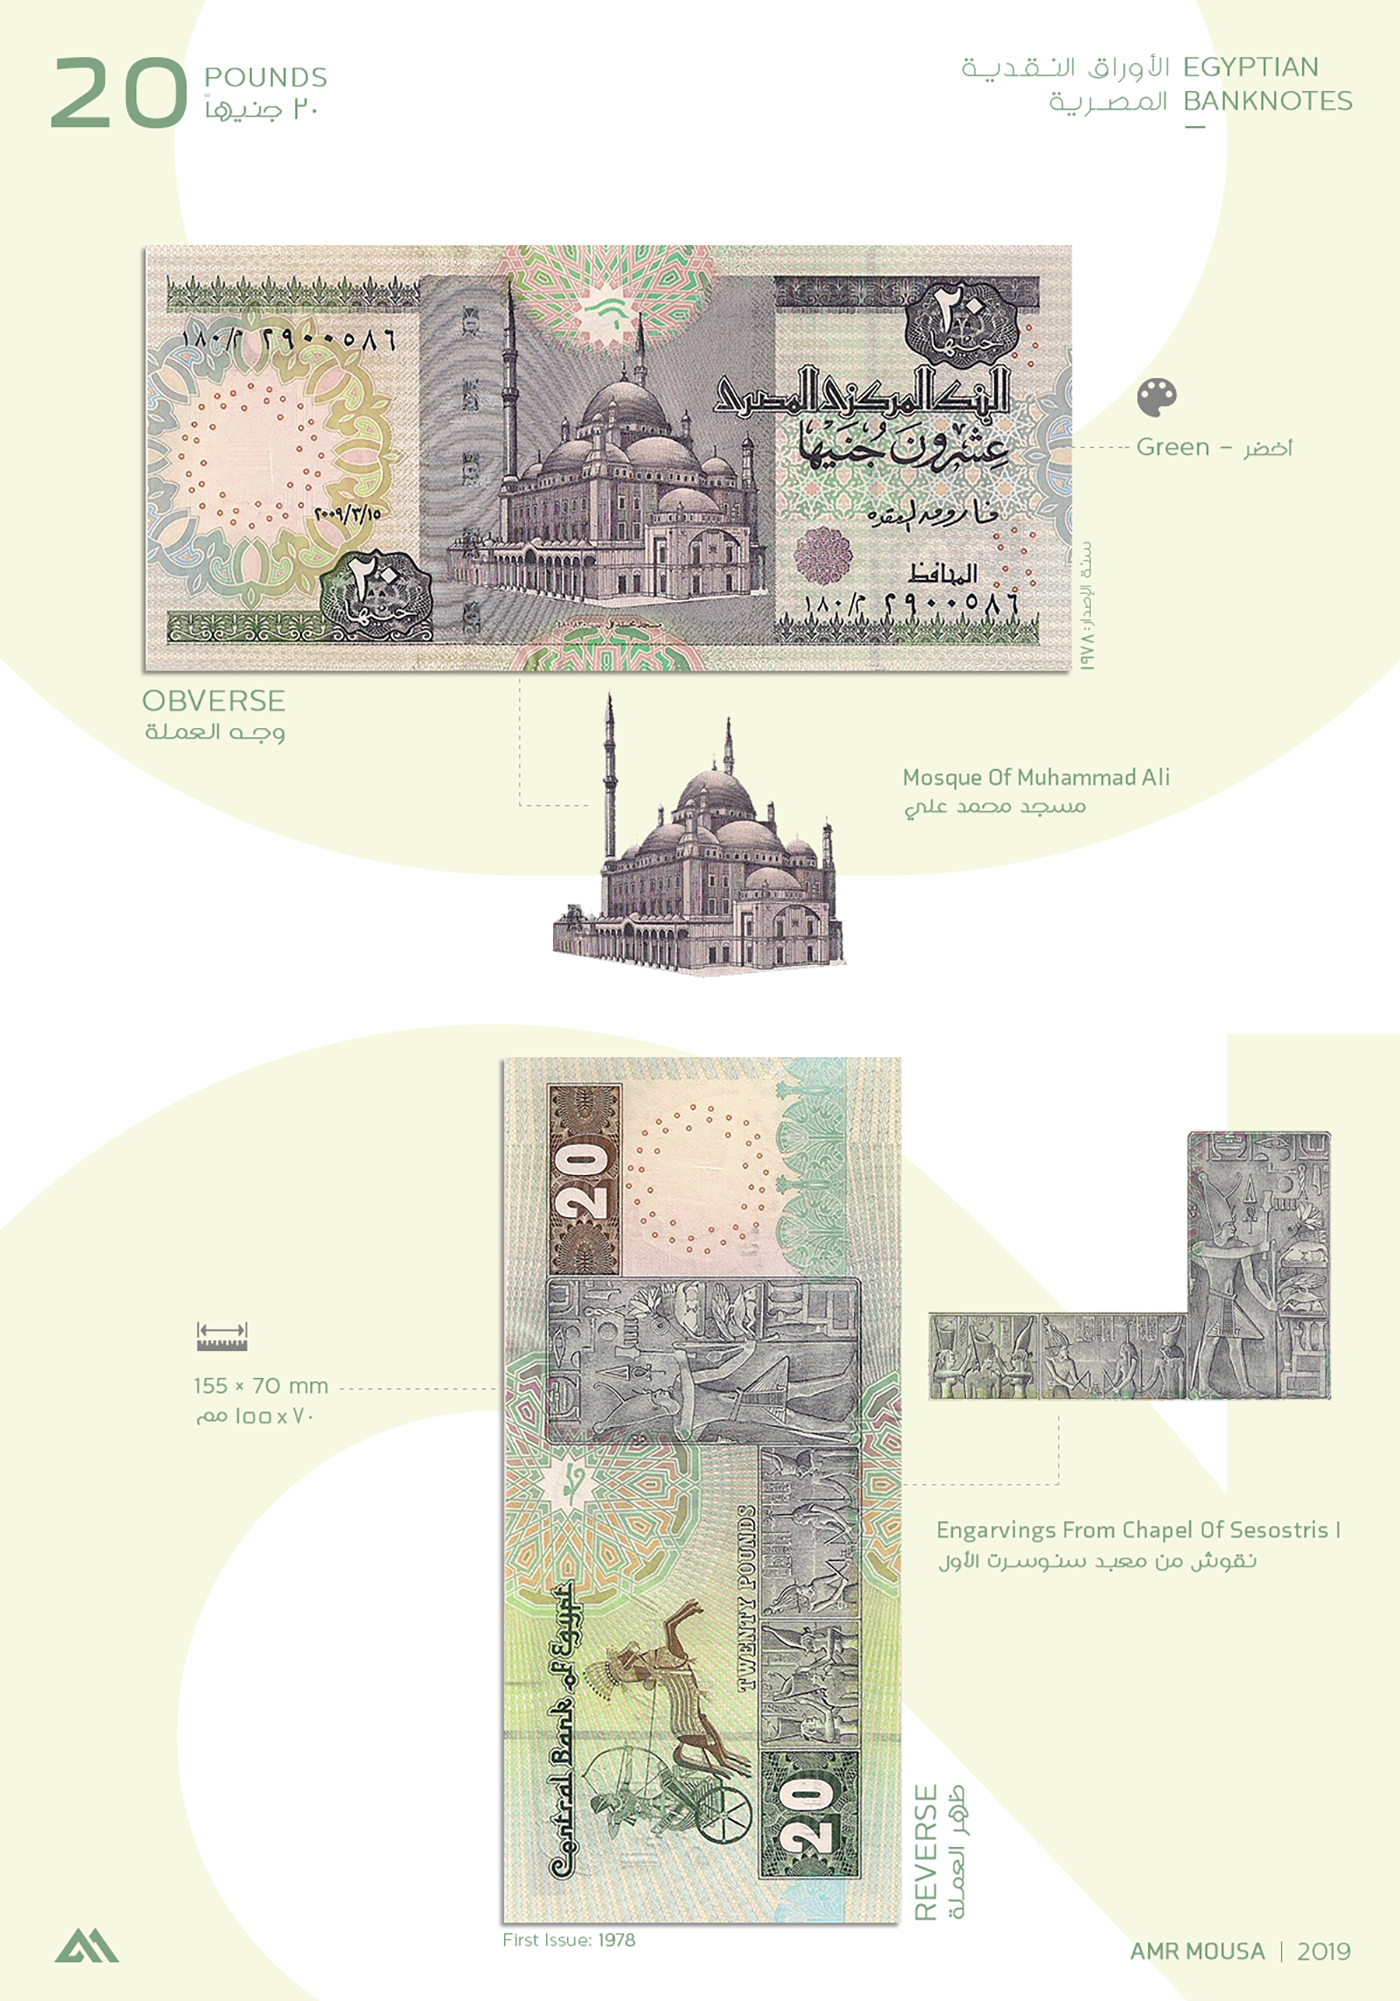 egypt banknotes currency pound architecture Interior Photography  pyramids infographics mousa